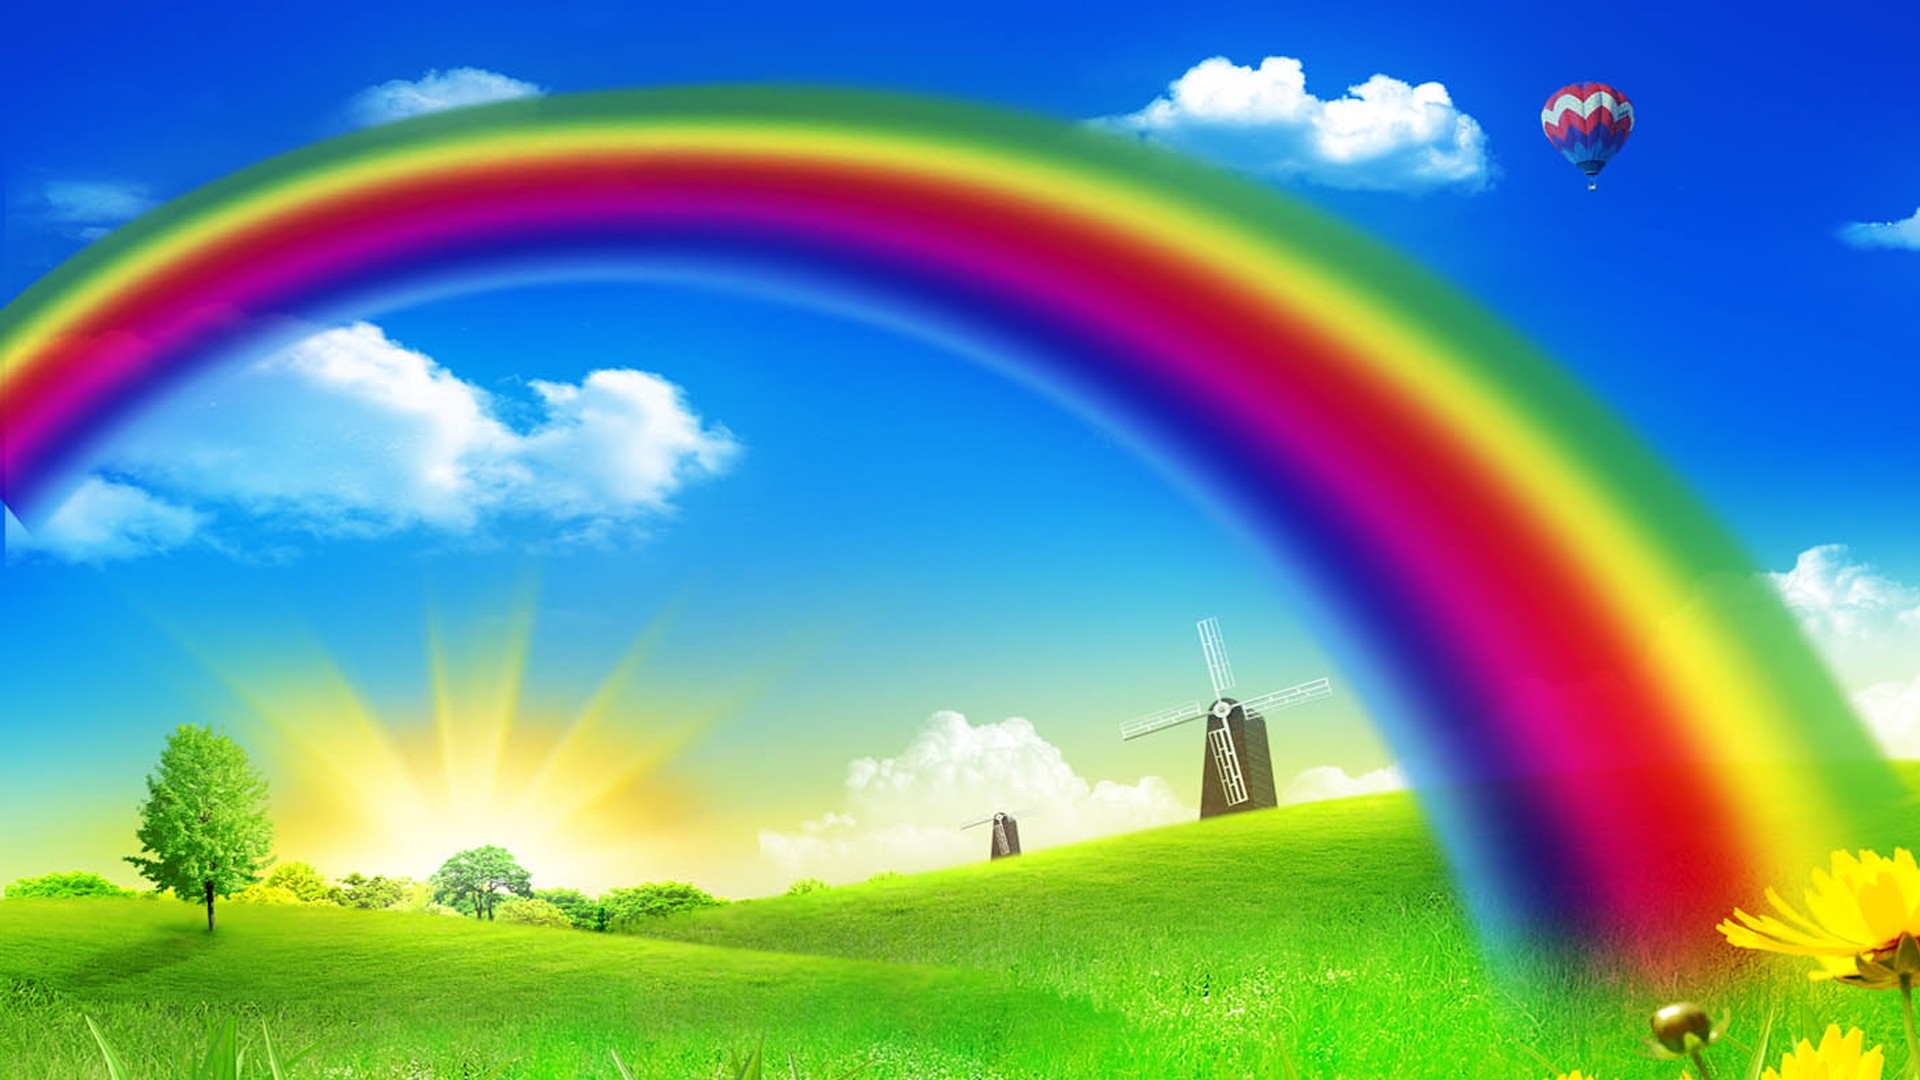 Cute Rainbow Desktop Backgrounds HD with image resolution 1920x1080 pixel. You can use this wallpaper as background for your desktop Computer Screensavers, Android or iPhone smartphones